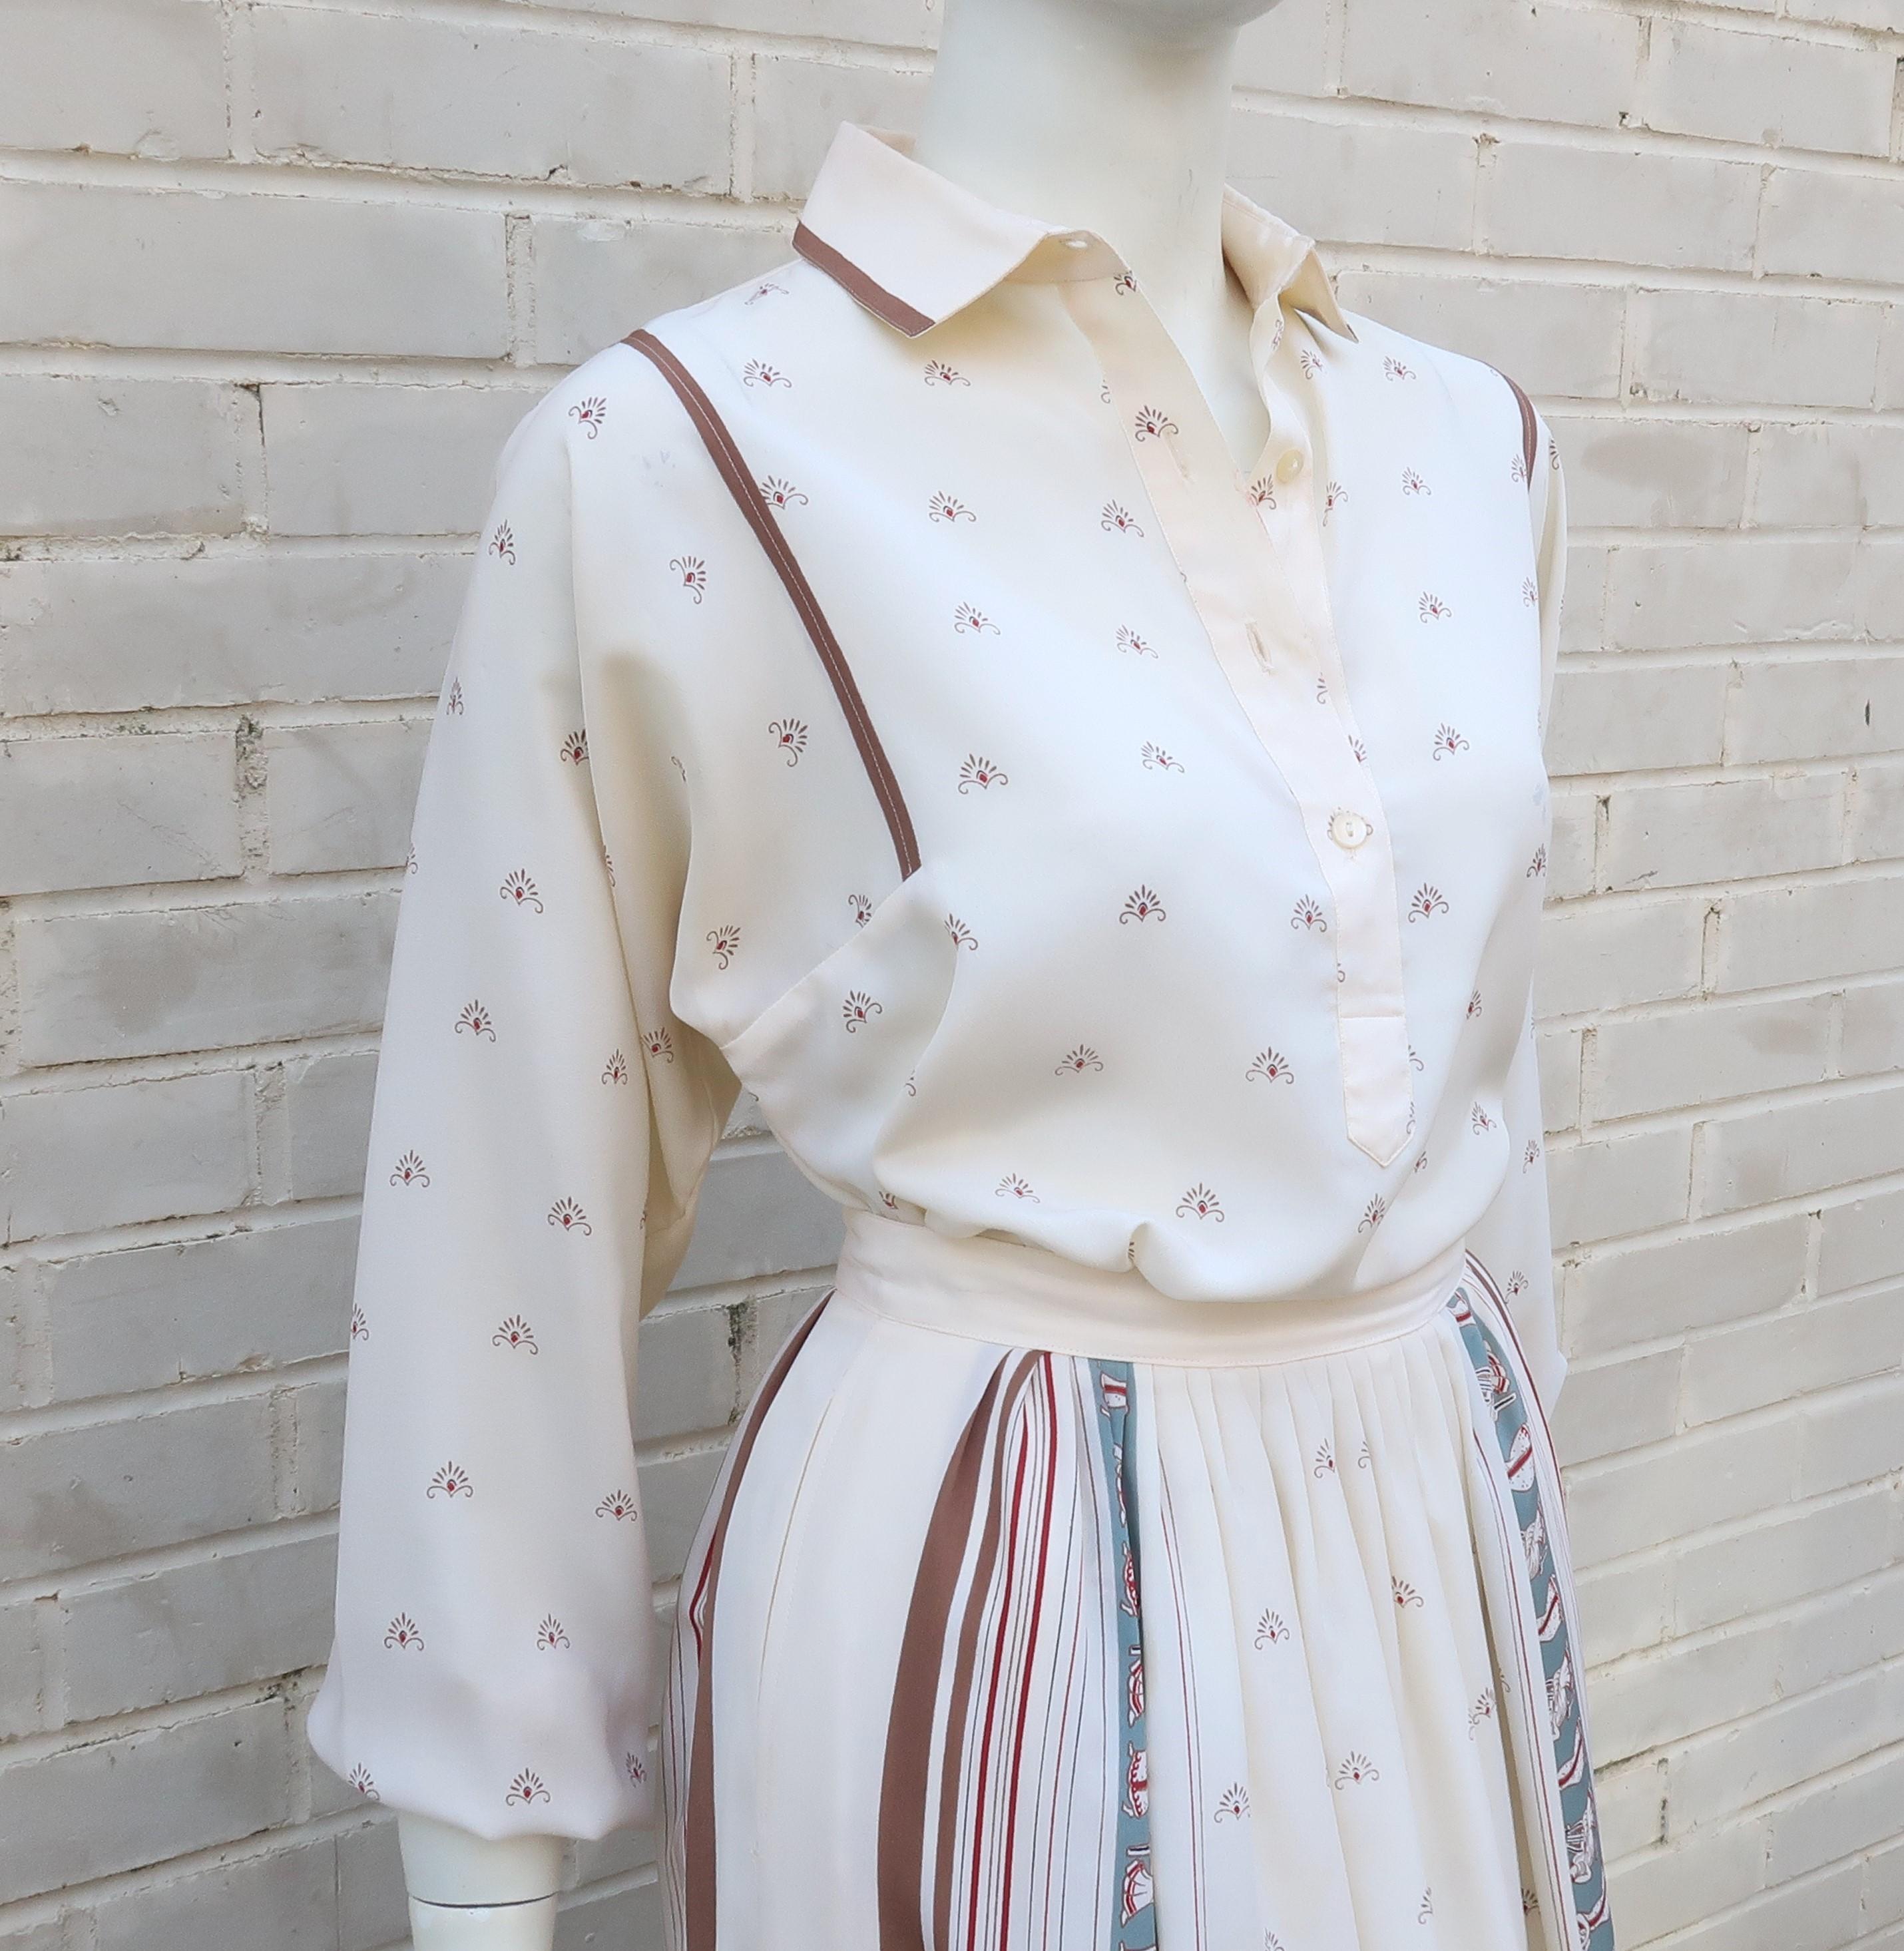 Serge Nancel French silk two piece dress including a top and coordinating skirt in shades of creamy white, light brown, oxblood and dove gray with a musical goddess motif.  The billowy top has a pullover construction with side vents and buttons half